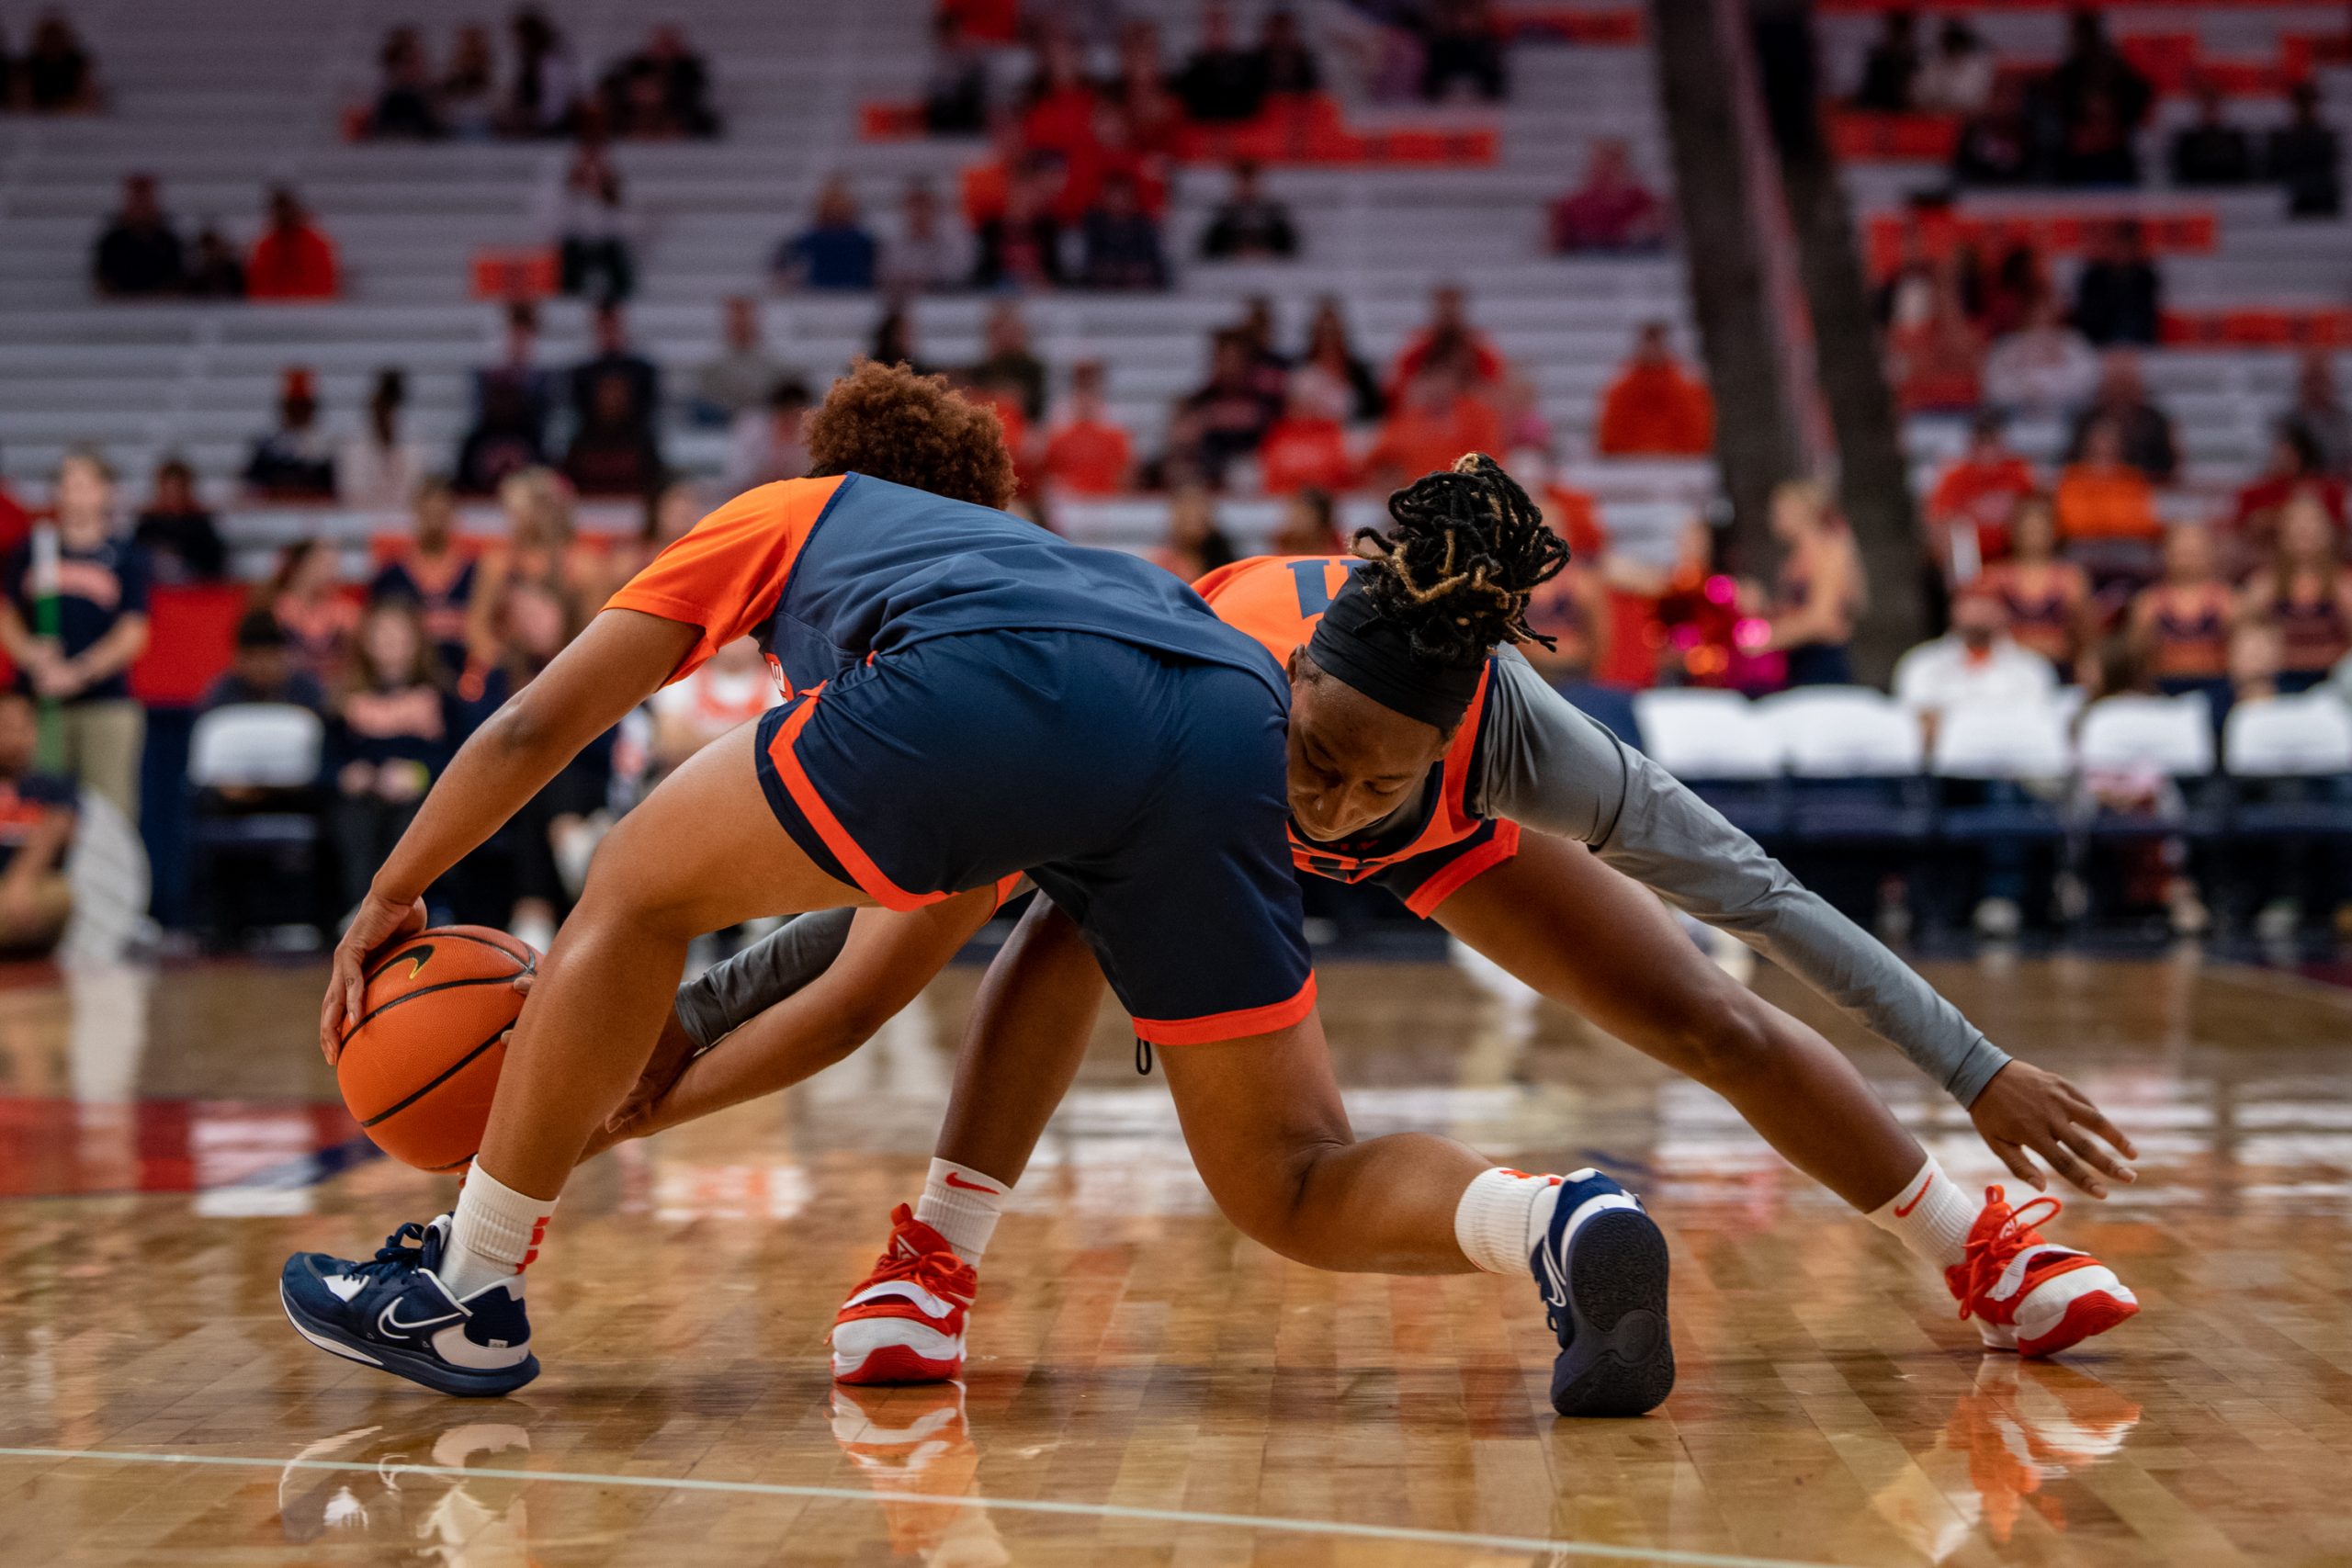 Freshman guard, Lexi McNabb, tries to steal the ball from Kennedi Perkins during the women's basketball scrimmage, at the Orange Tip Off fan event. Photo by Ryan Brady. 10/14/22